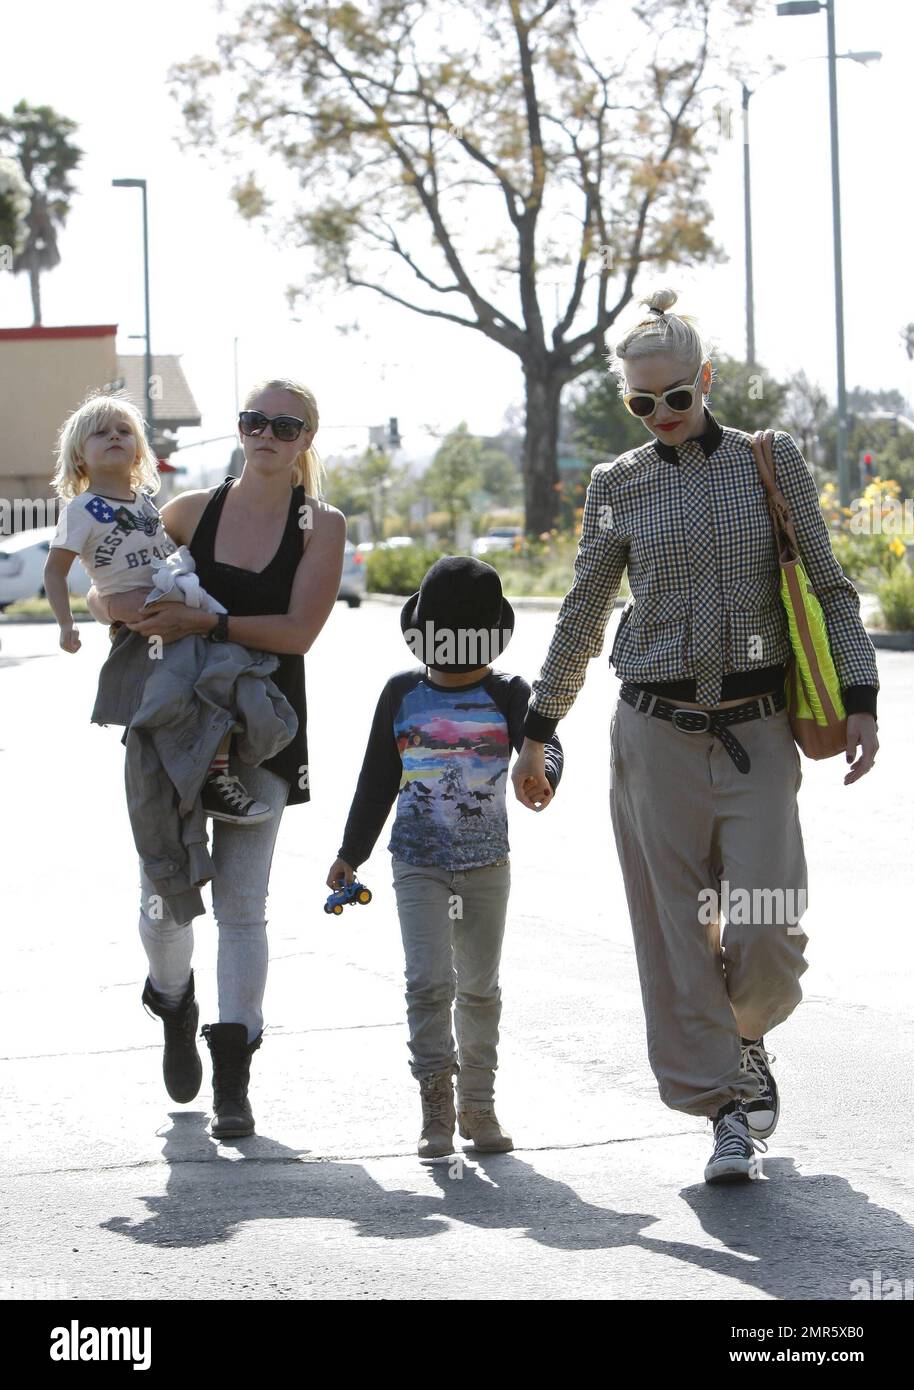 'No Doubt' singer and fashion designer Gwen Stefani takes her sons, 6 year old Kingston and 4 year old Zuma for a family day out at Underwood Family Farms in L.A. 42 year old Gwen wore a tan plaid jacket with baggy tan pants and topped off with a black hat, black sneakers and sunglasses as she is seen carrying three boxes of strawberries she purchased at the farm. Kingston is seen enjoying a pony ride and riding a giant tricycle. Los Angeles, CA. 26th May 2012. Stock Photo